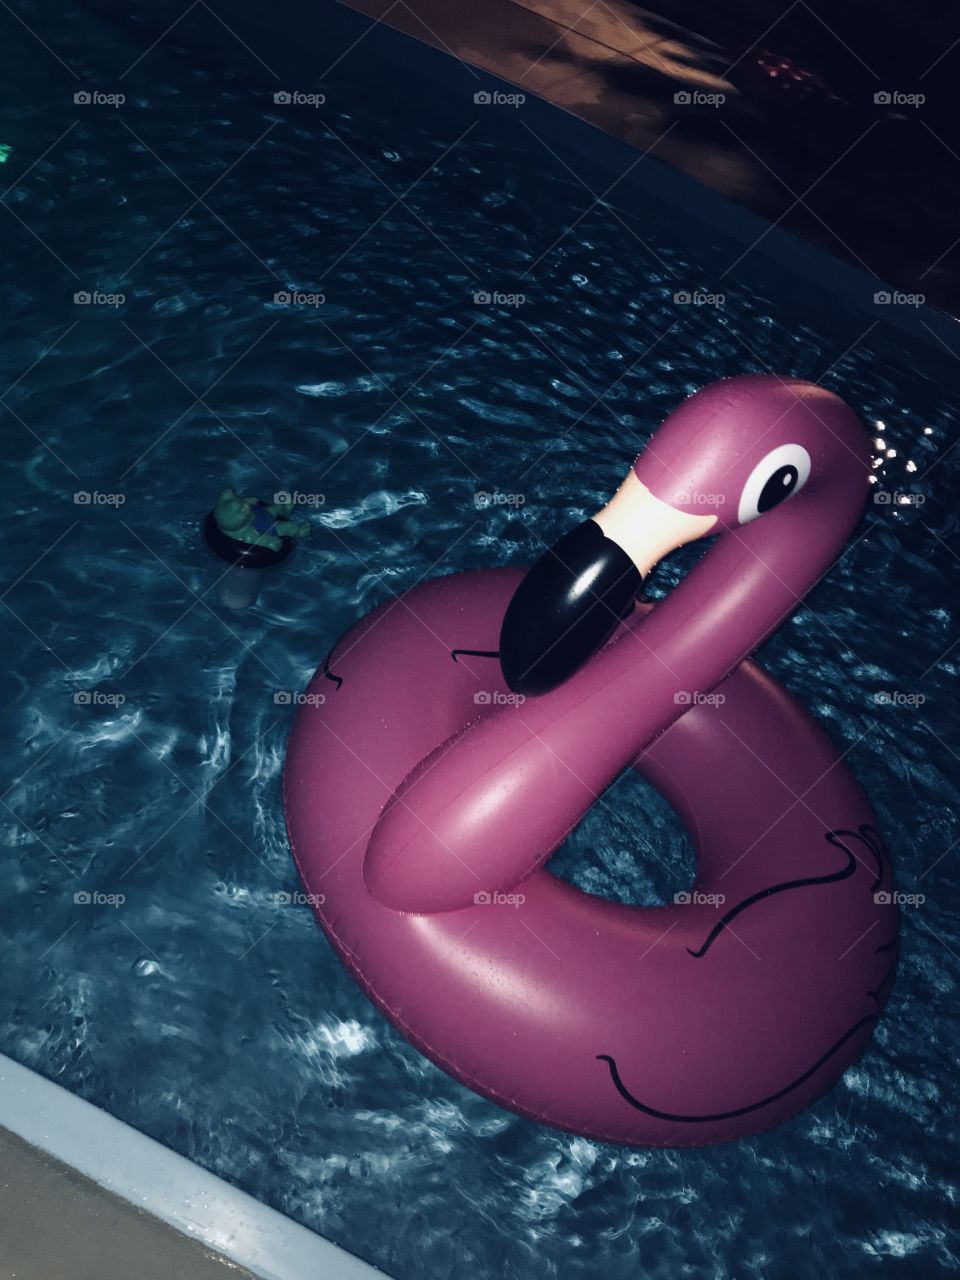 Aesthetic pool picture (pt. 2)